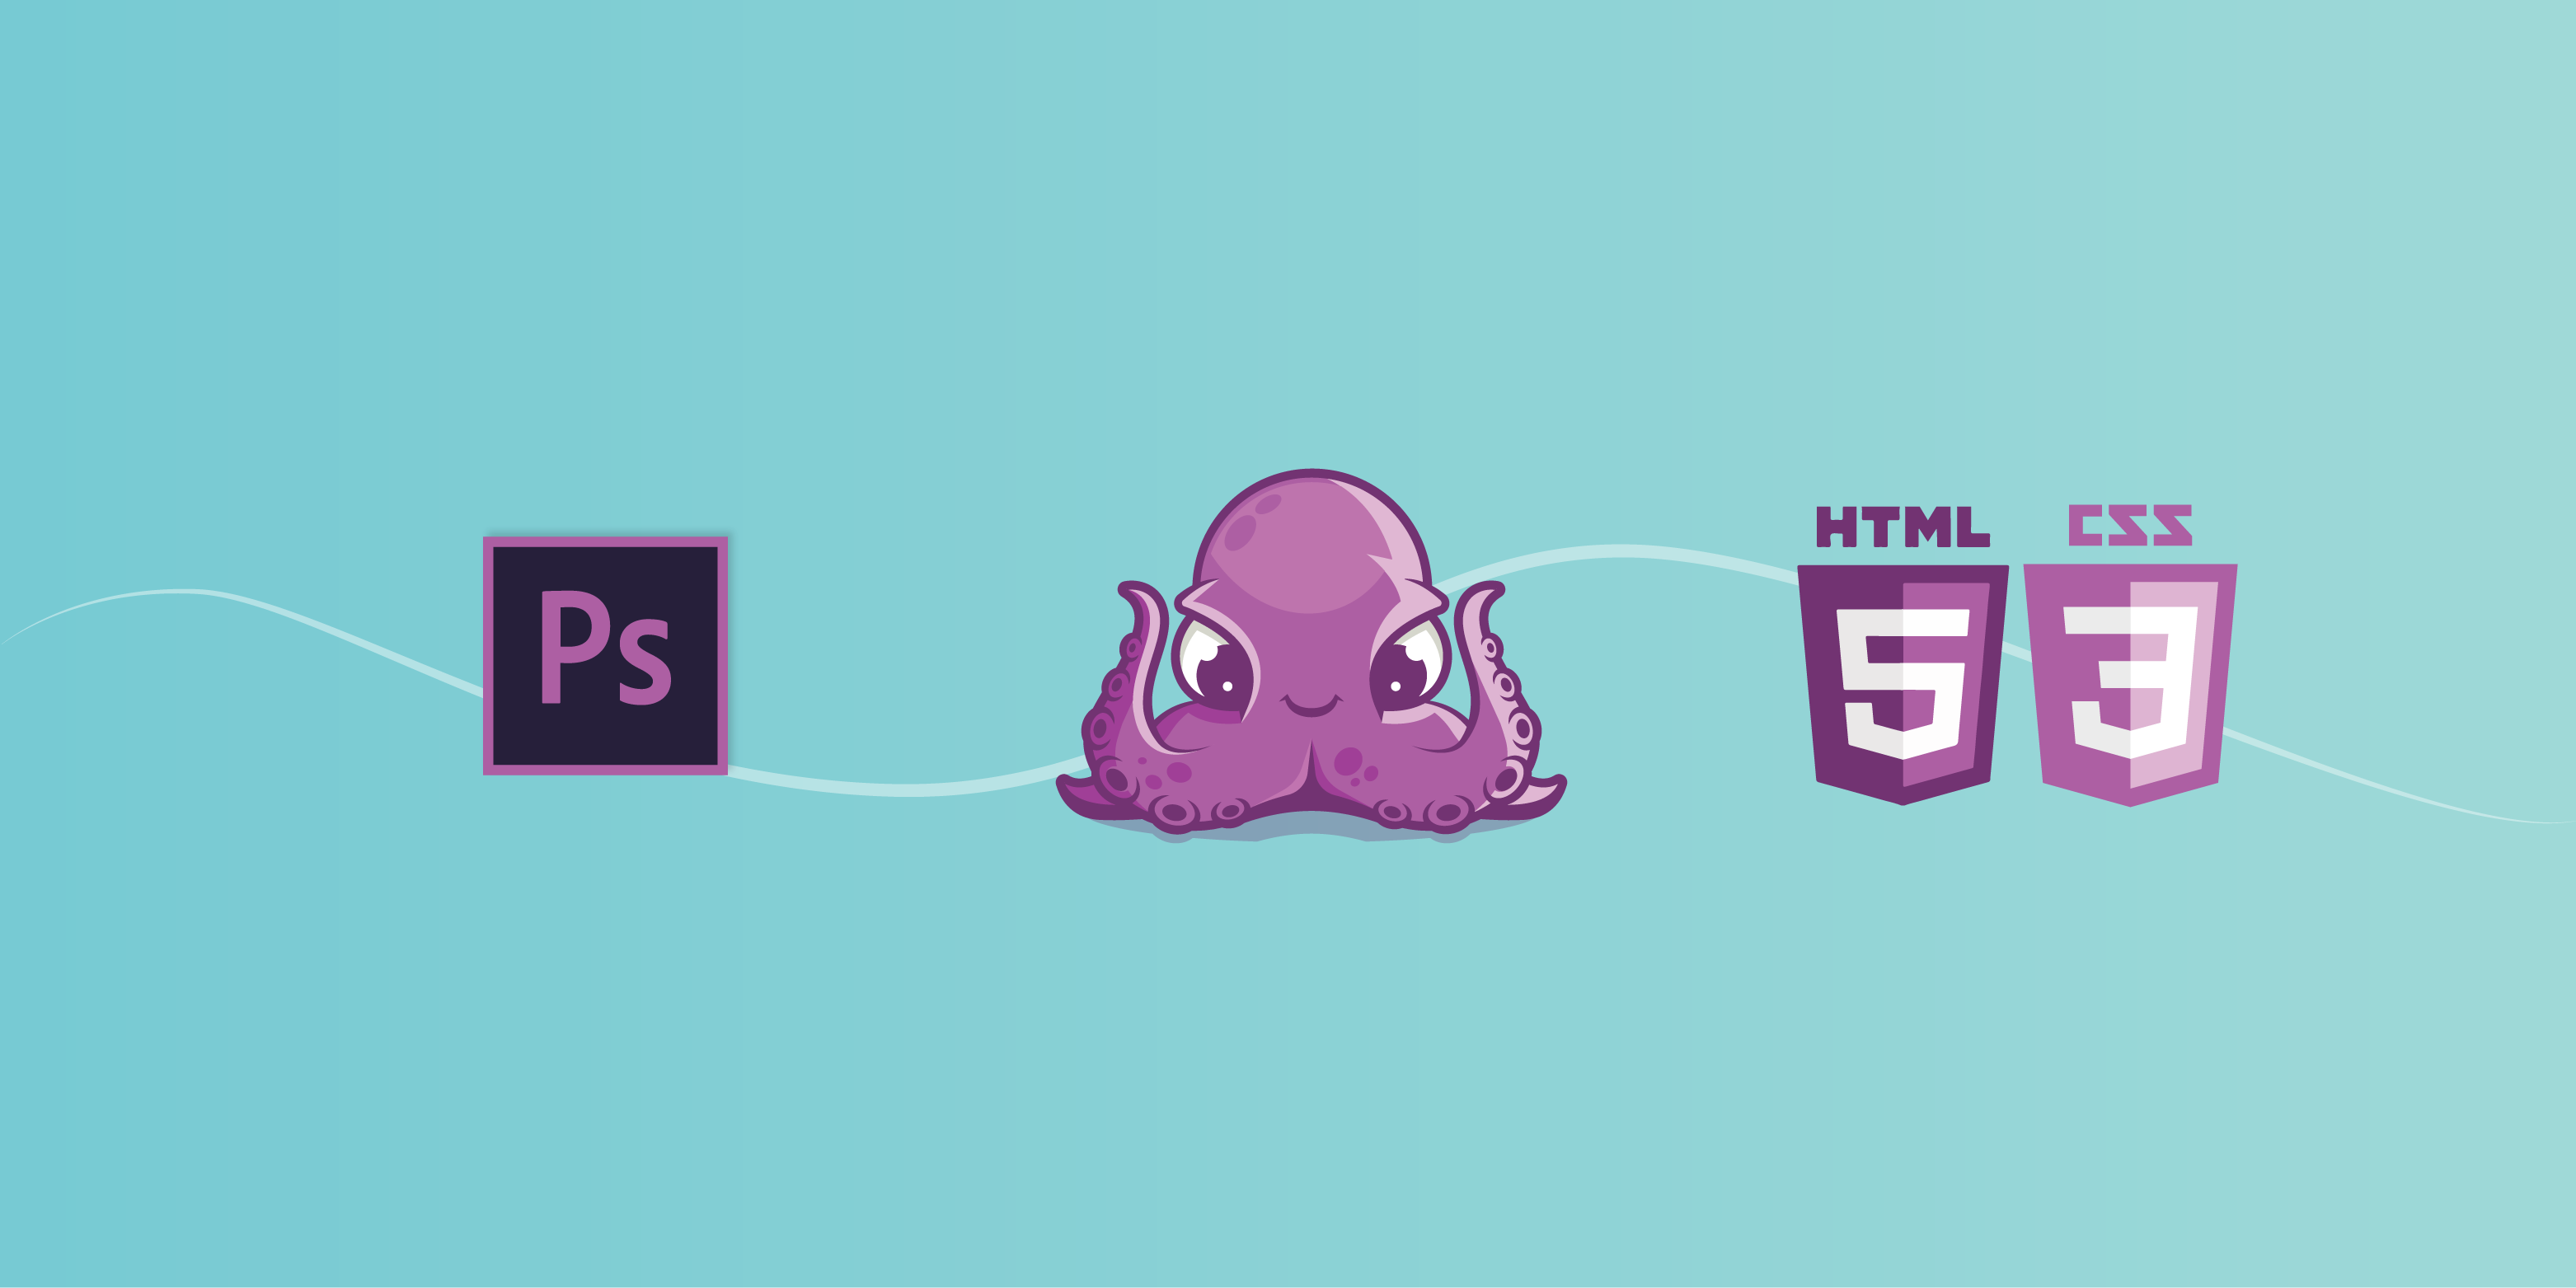 Convert a PSD to HTML/CSS in 4 easy steps